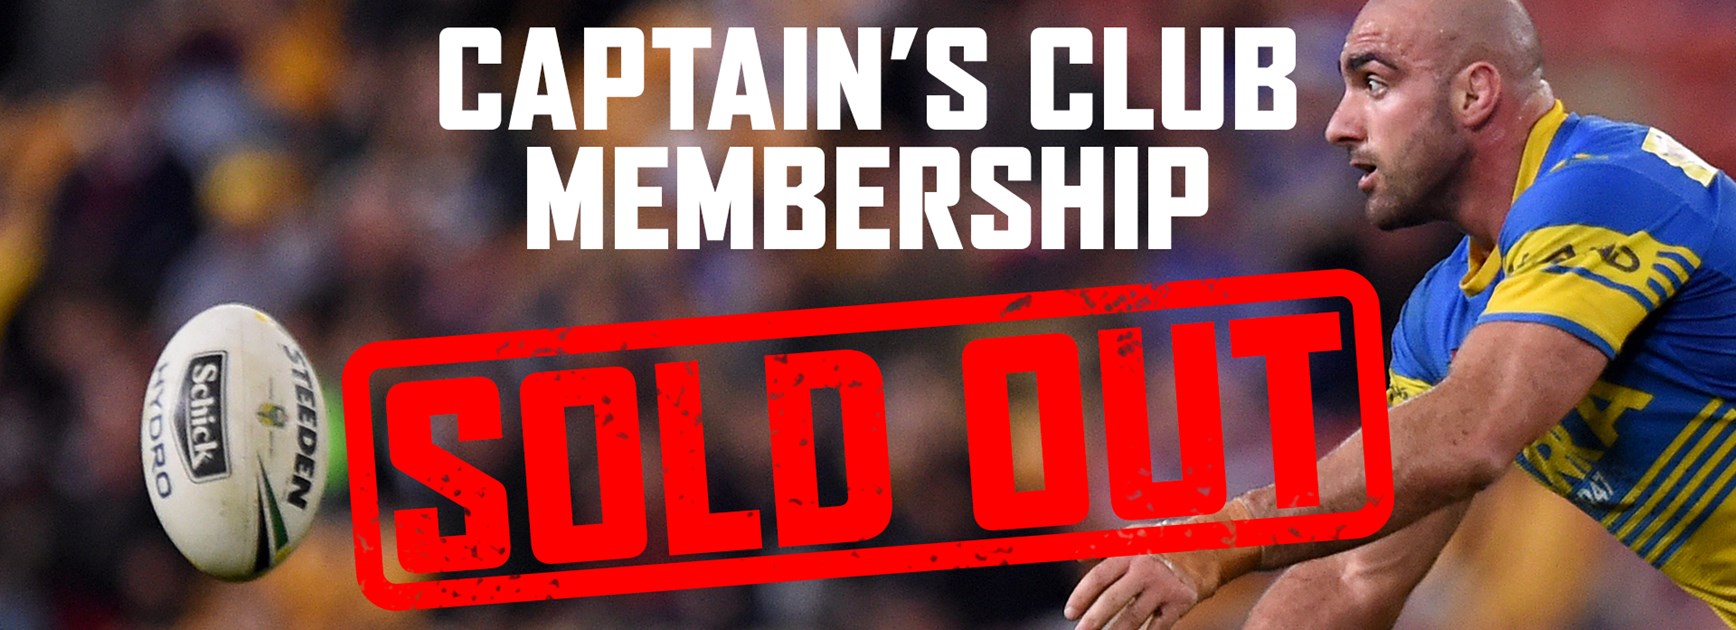 Captain's Club Memberships - Sold Out!